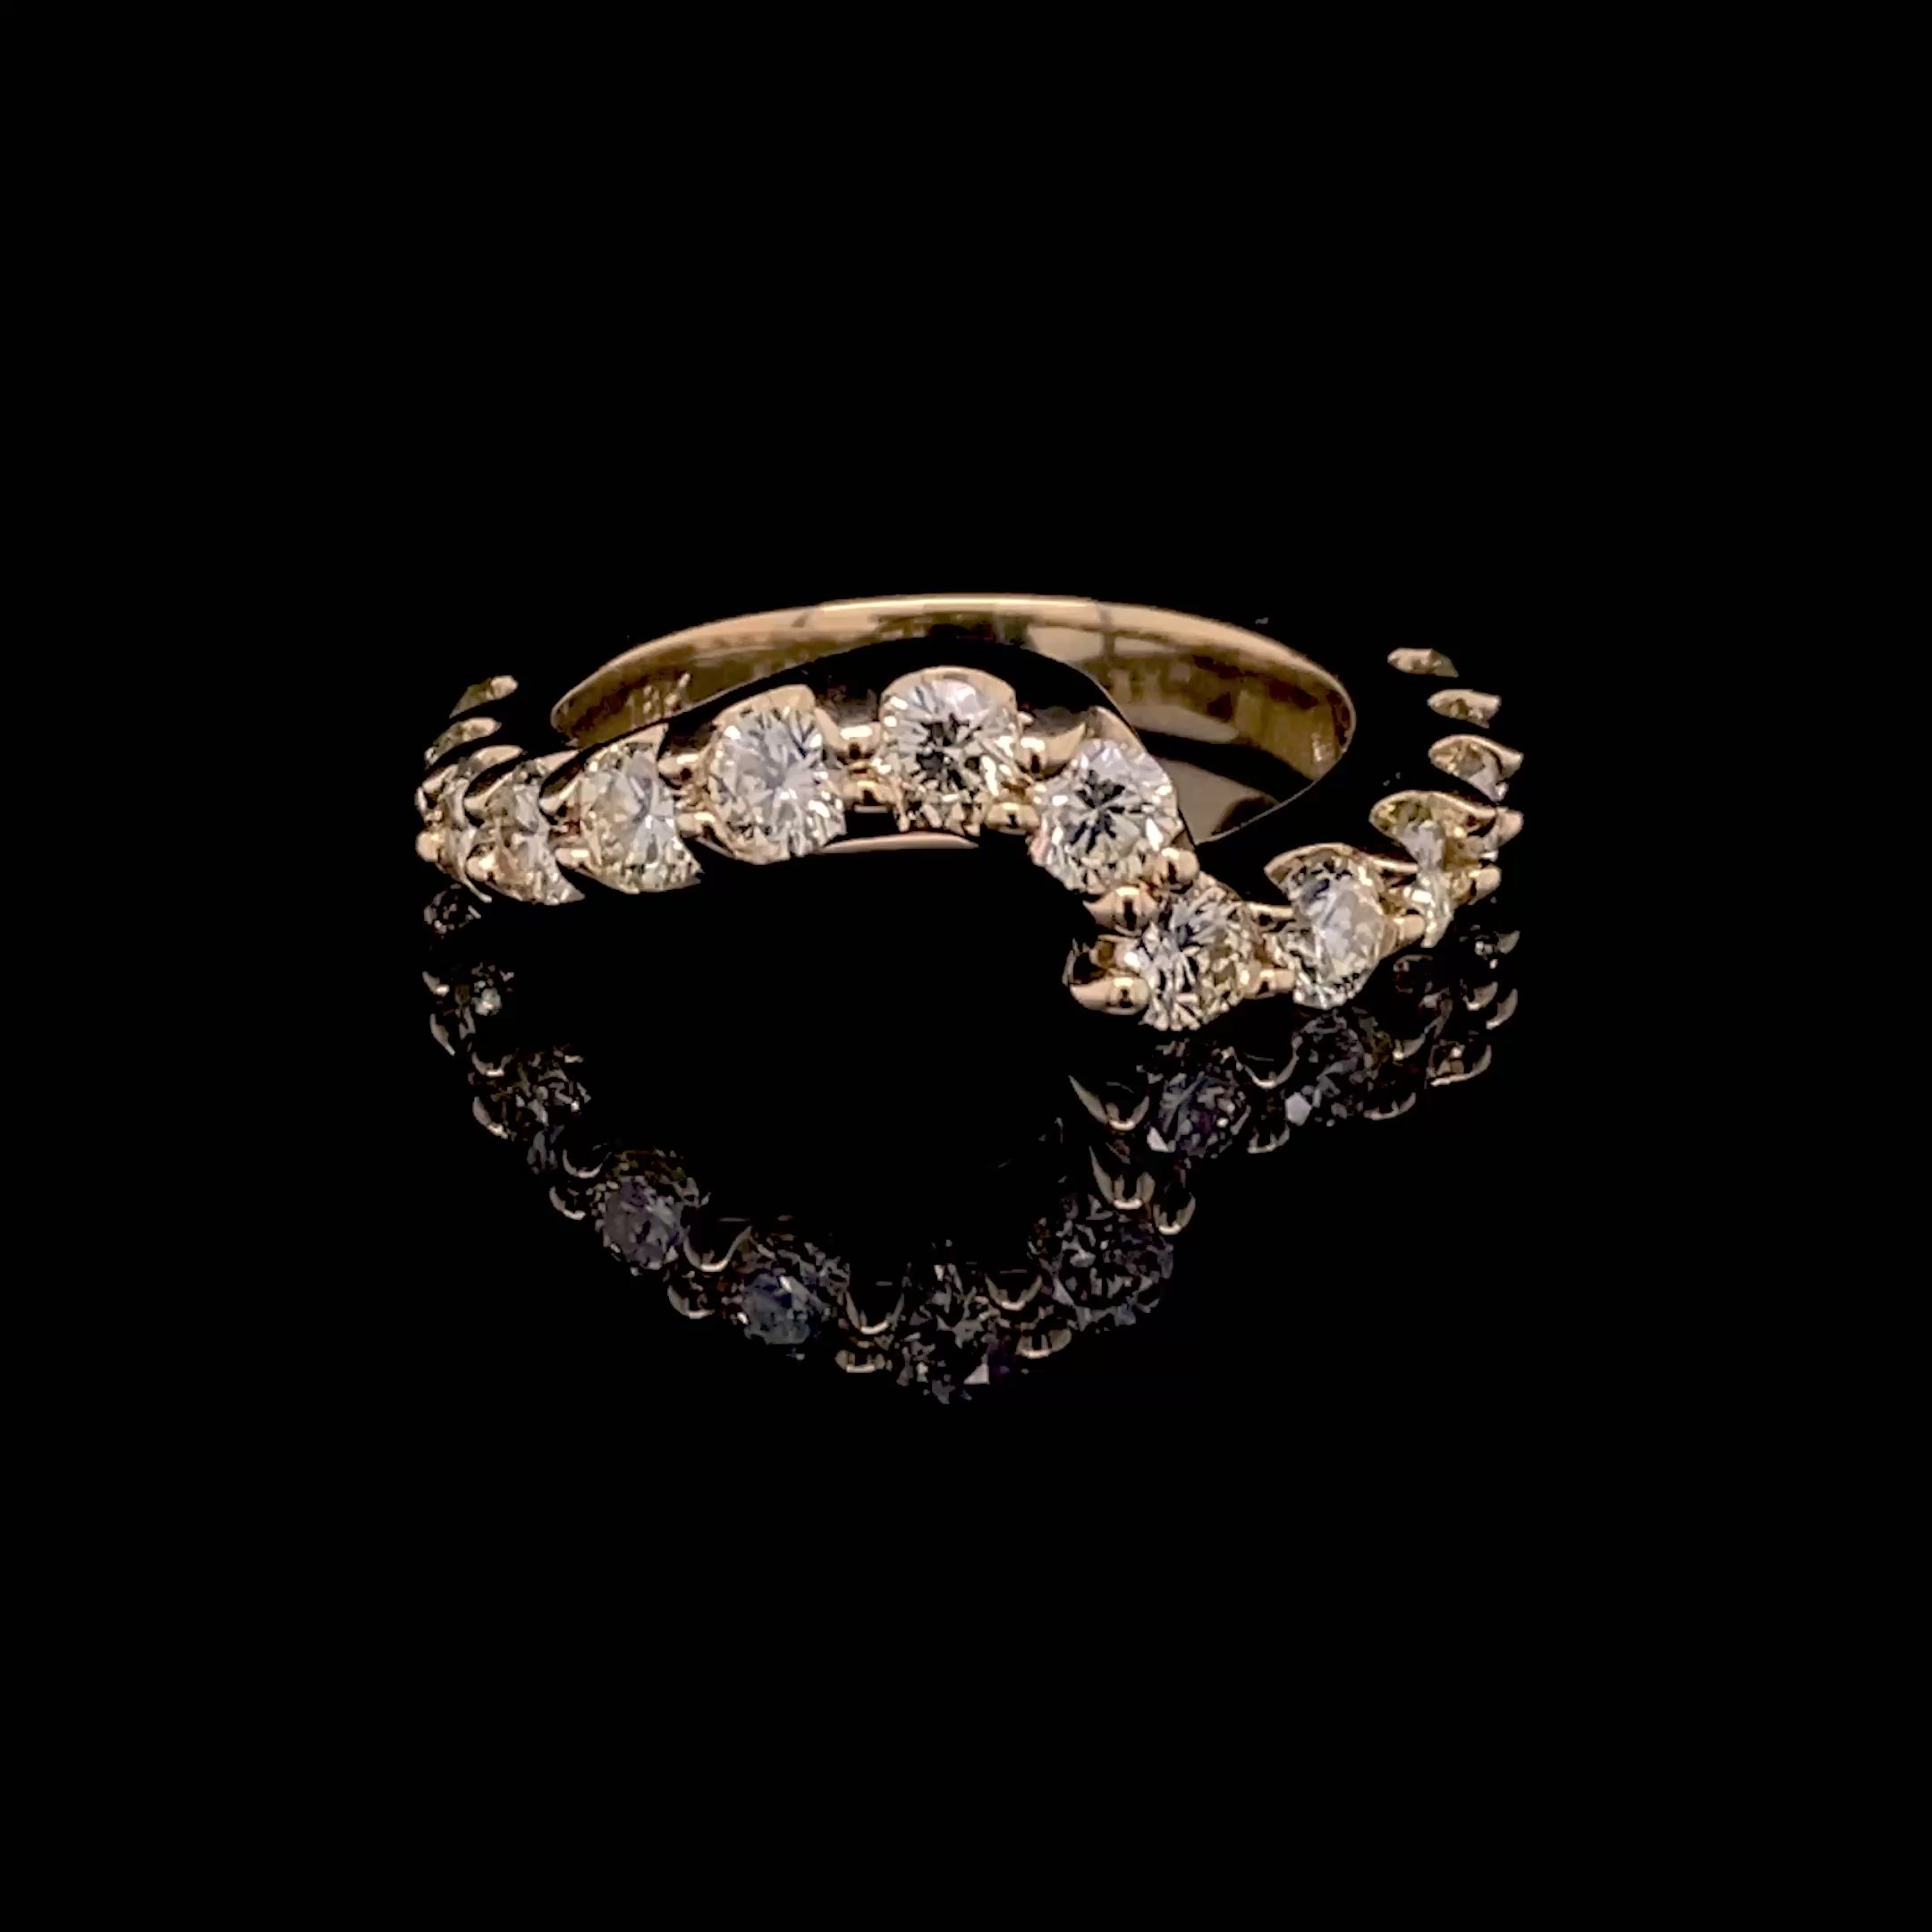 Exquisite 1.30CT Round Cut Diamond Wedding Band in 18KT Yellow Gold